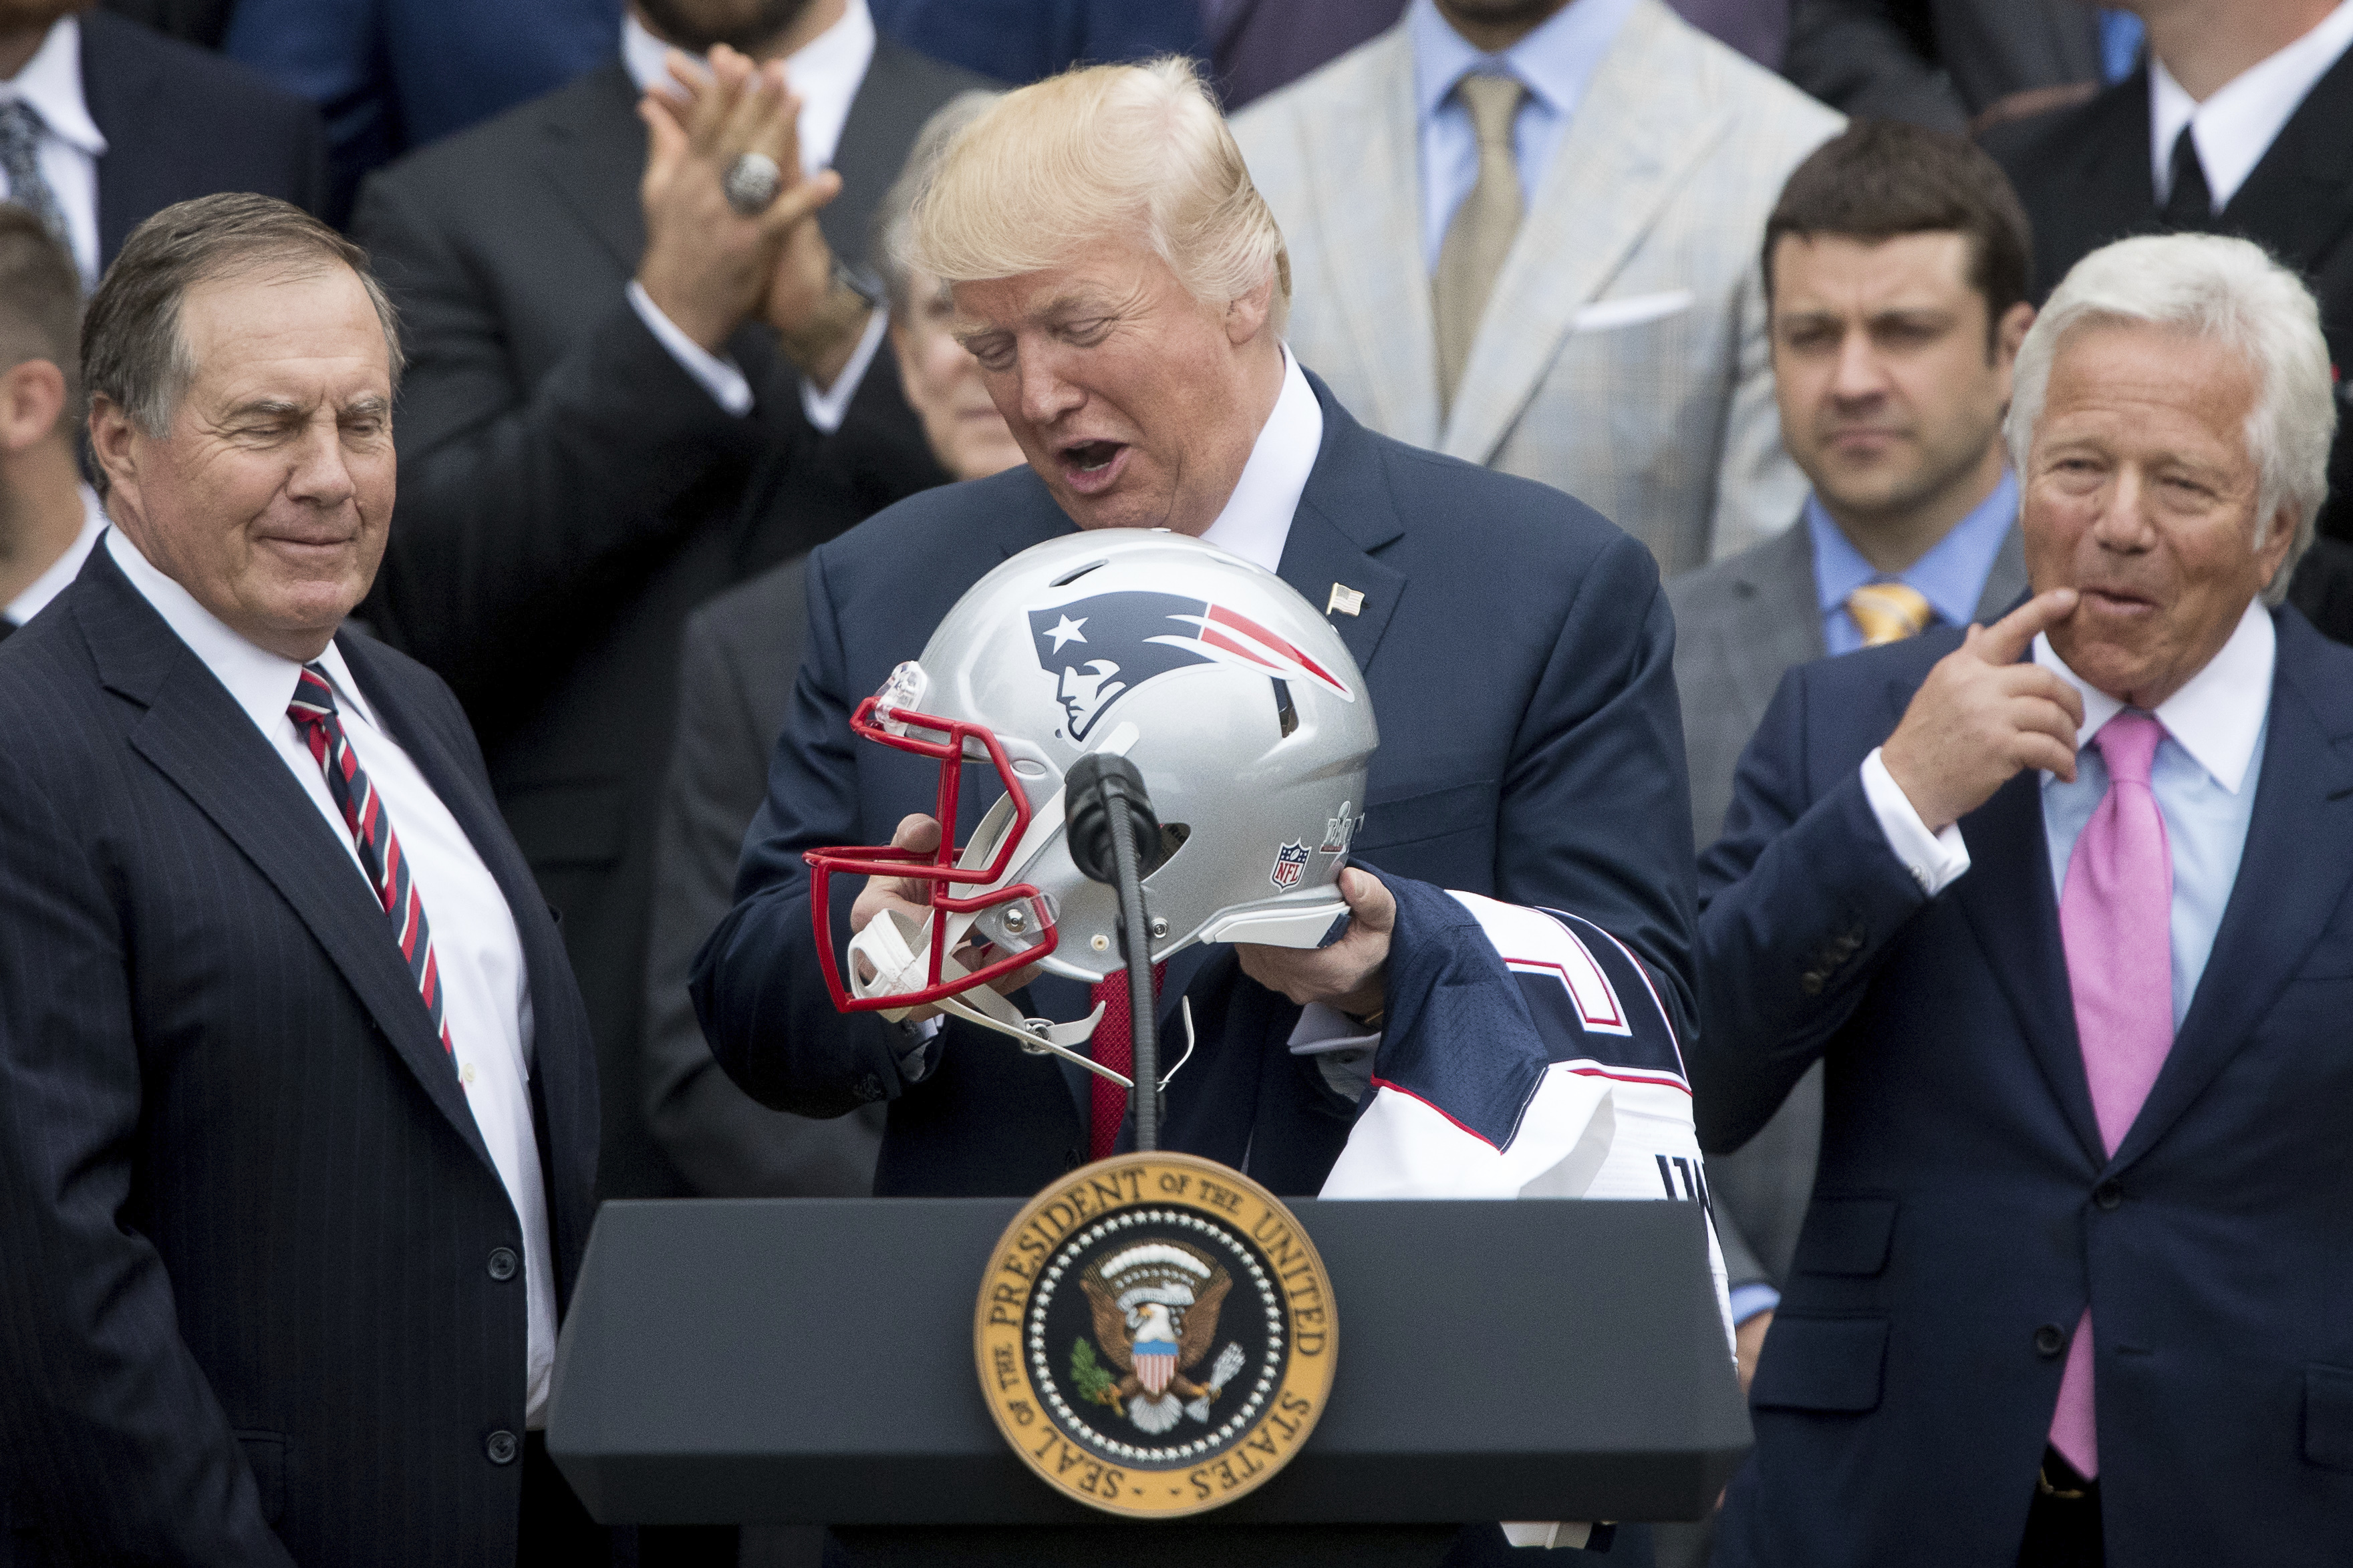 foto : andrew harnik : day 90 - in this april 19, 2017, file photo, president donald trump. flanked by new england patriots head coach bill belichick, left, and owner robert kraft, holds a new england patriots football helmet and jersey during a ceremony on the south lawn of the white house in washington, where he honored the super bowl champion new england patriots for their super bowl li victory. (ap photo/andrew harnik, file)